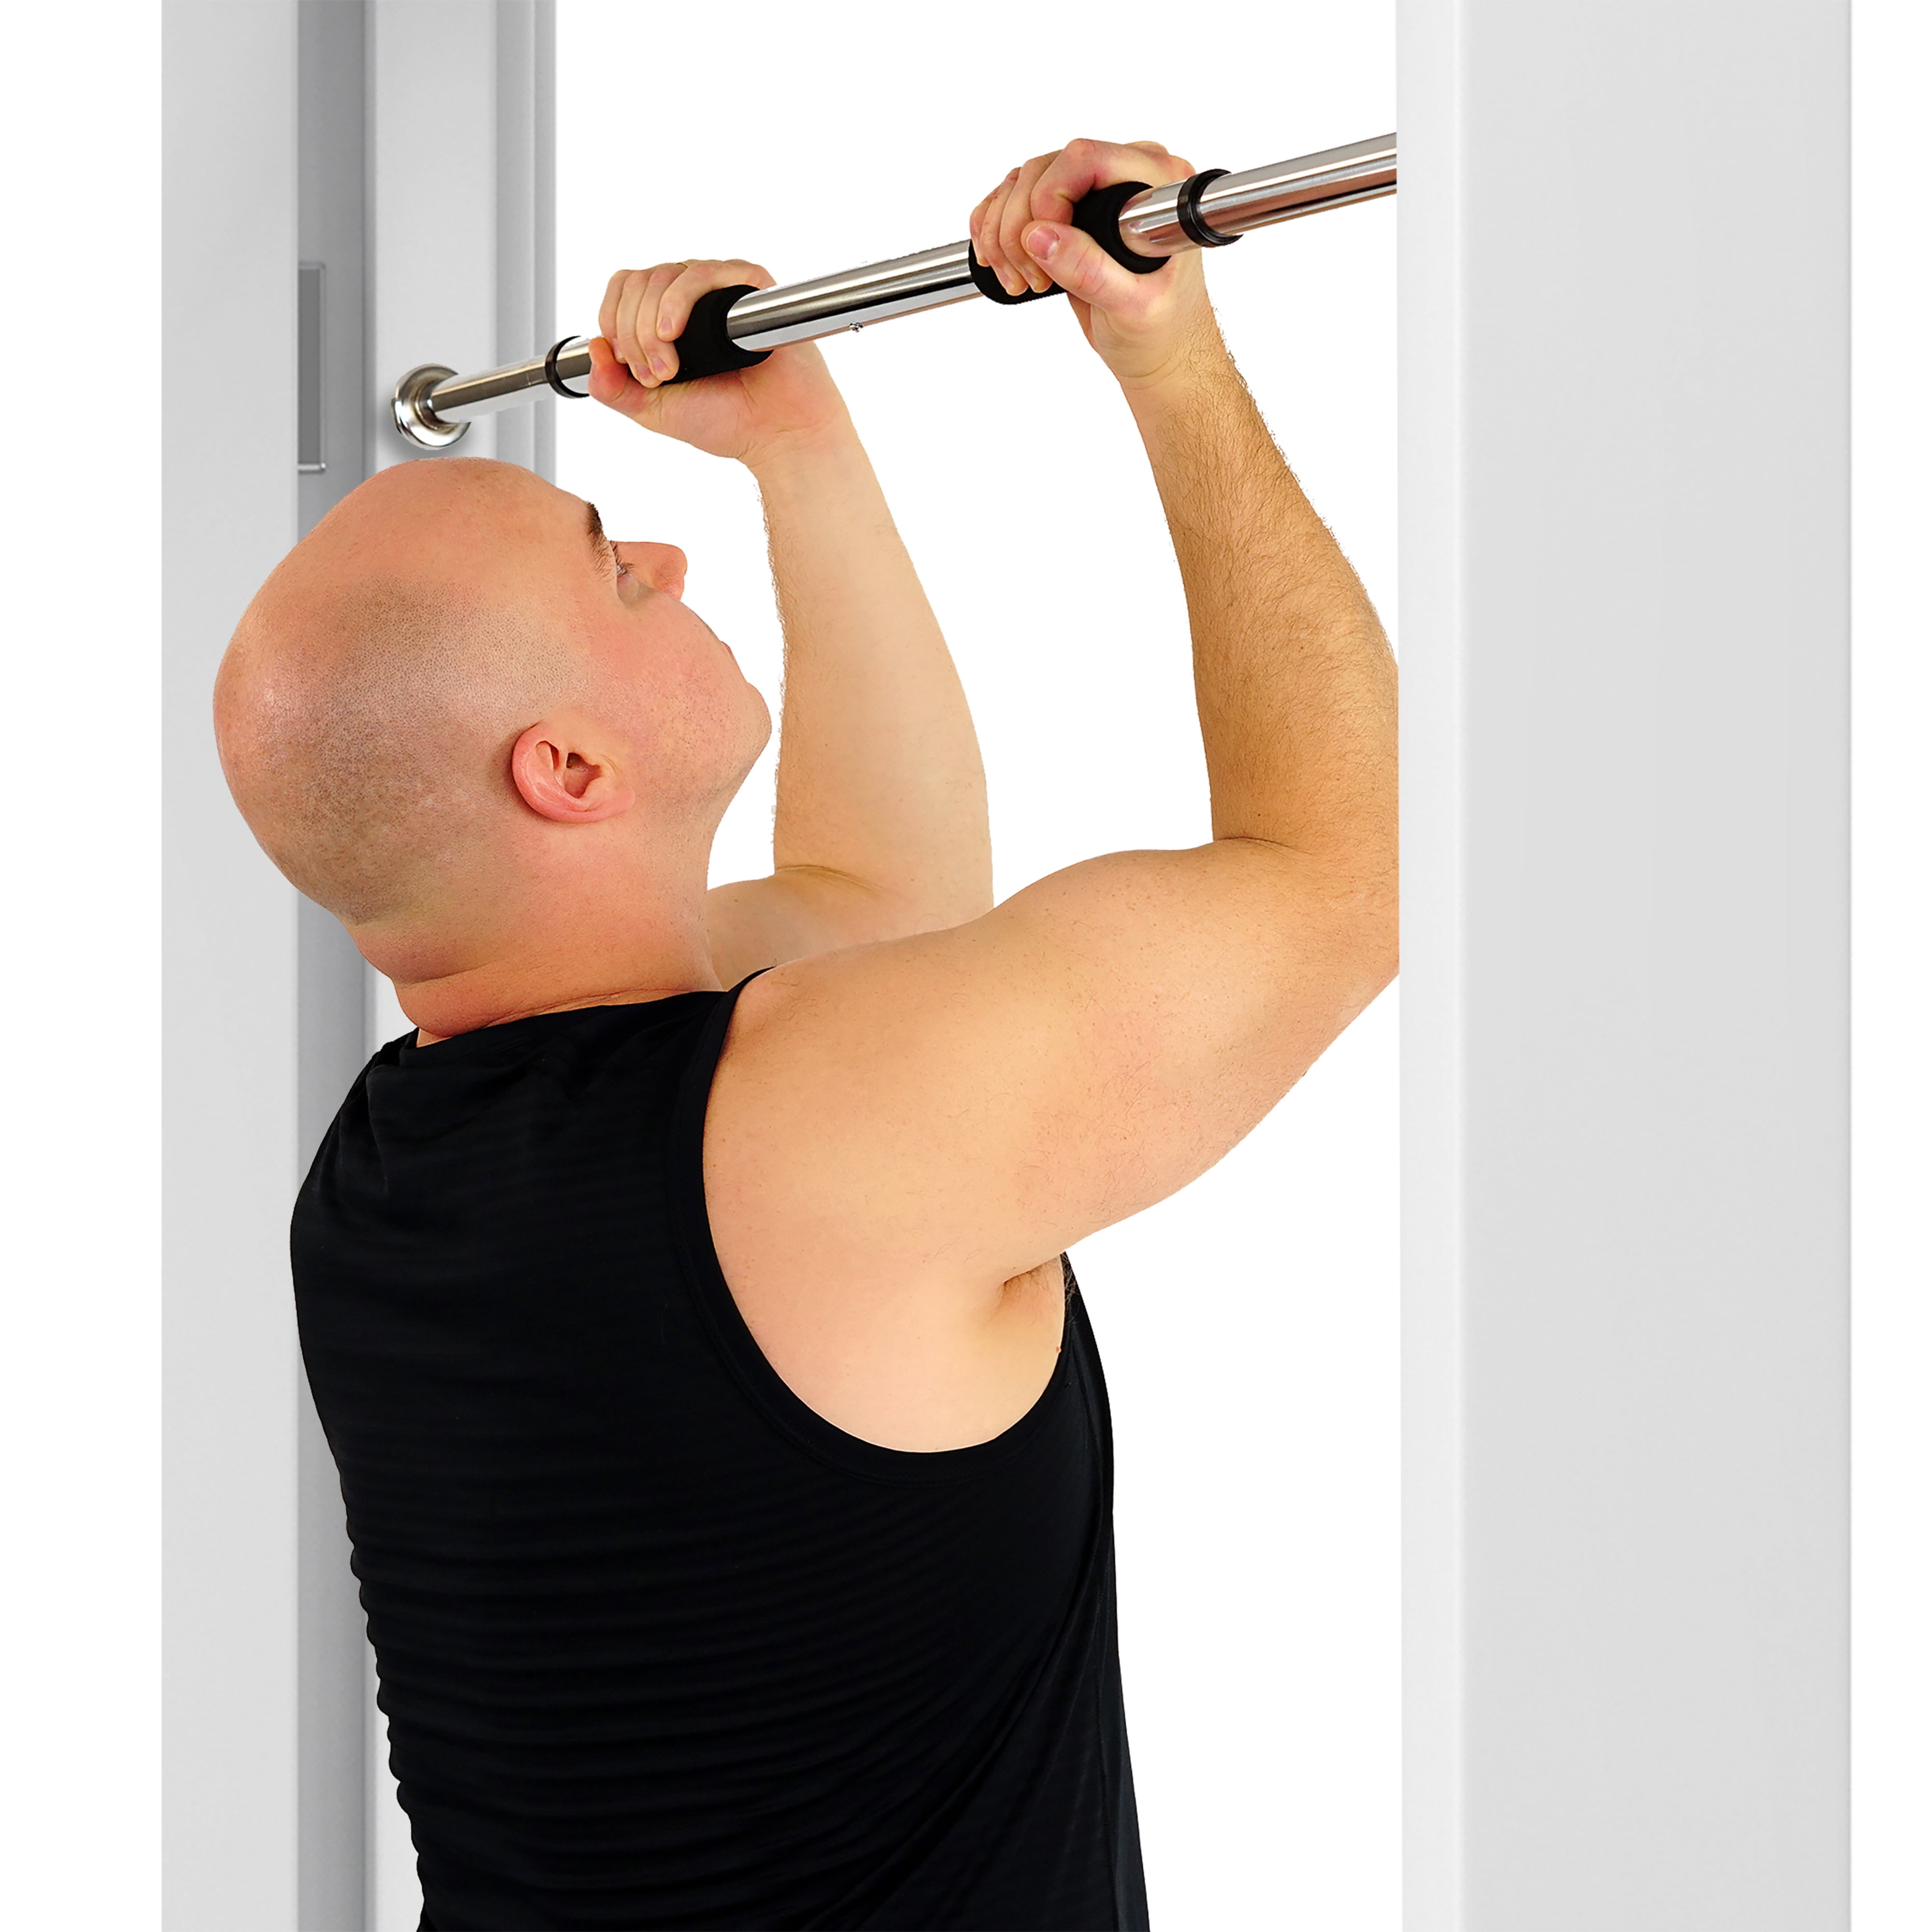 Door Home Exercise Workout Training Gym Bar Chin Up Pull Up Fitness Adjustable